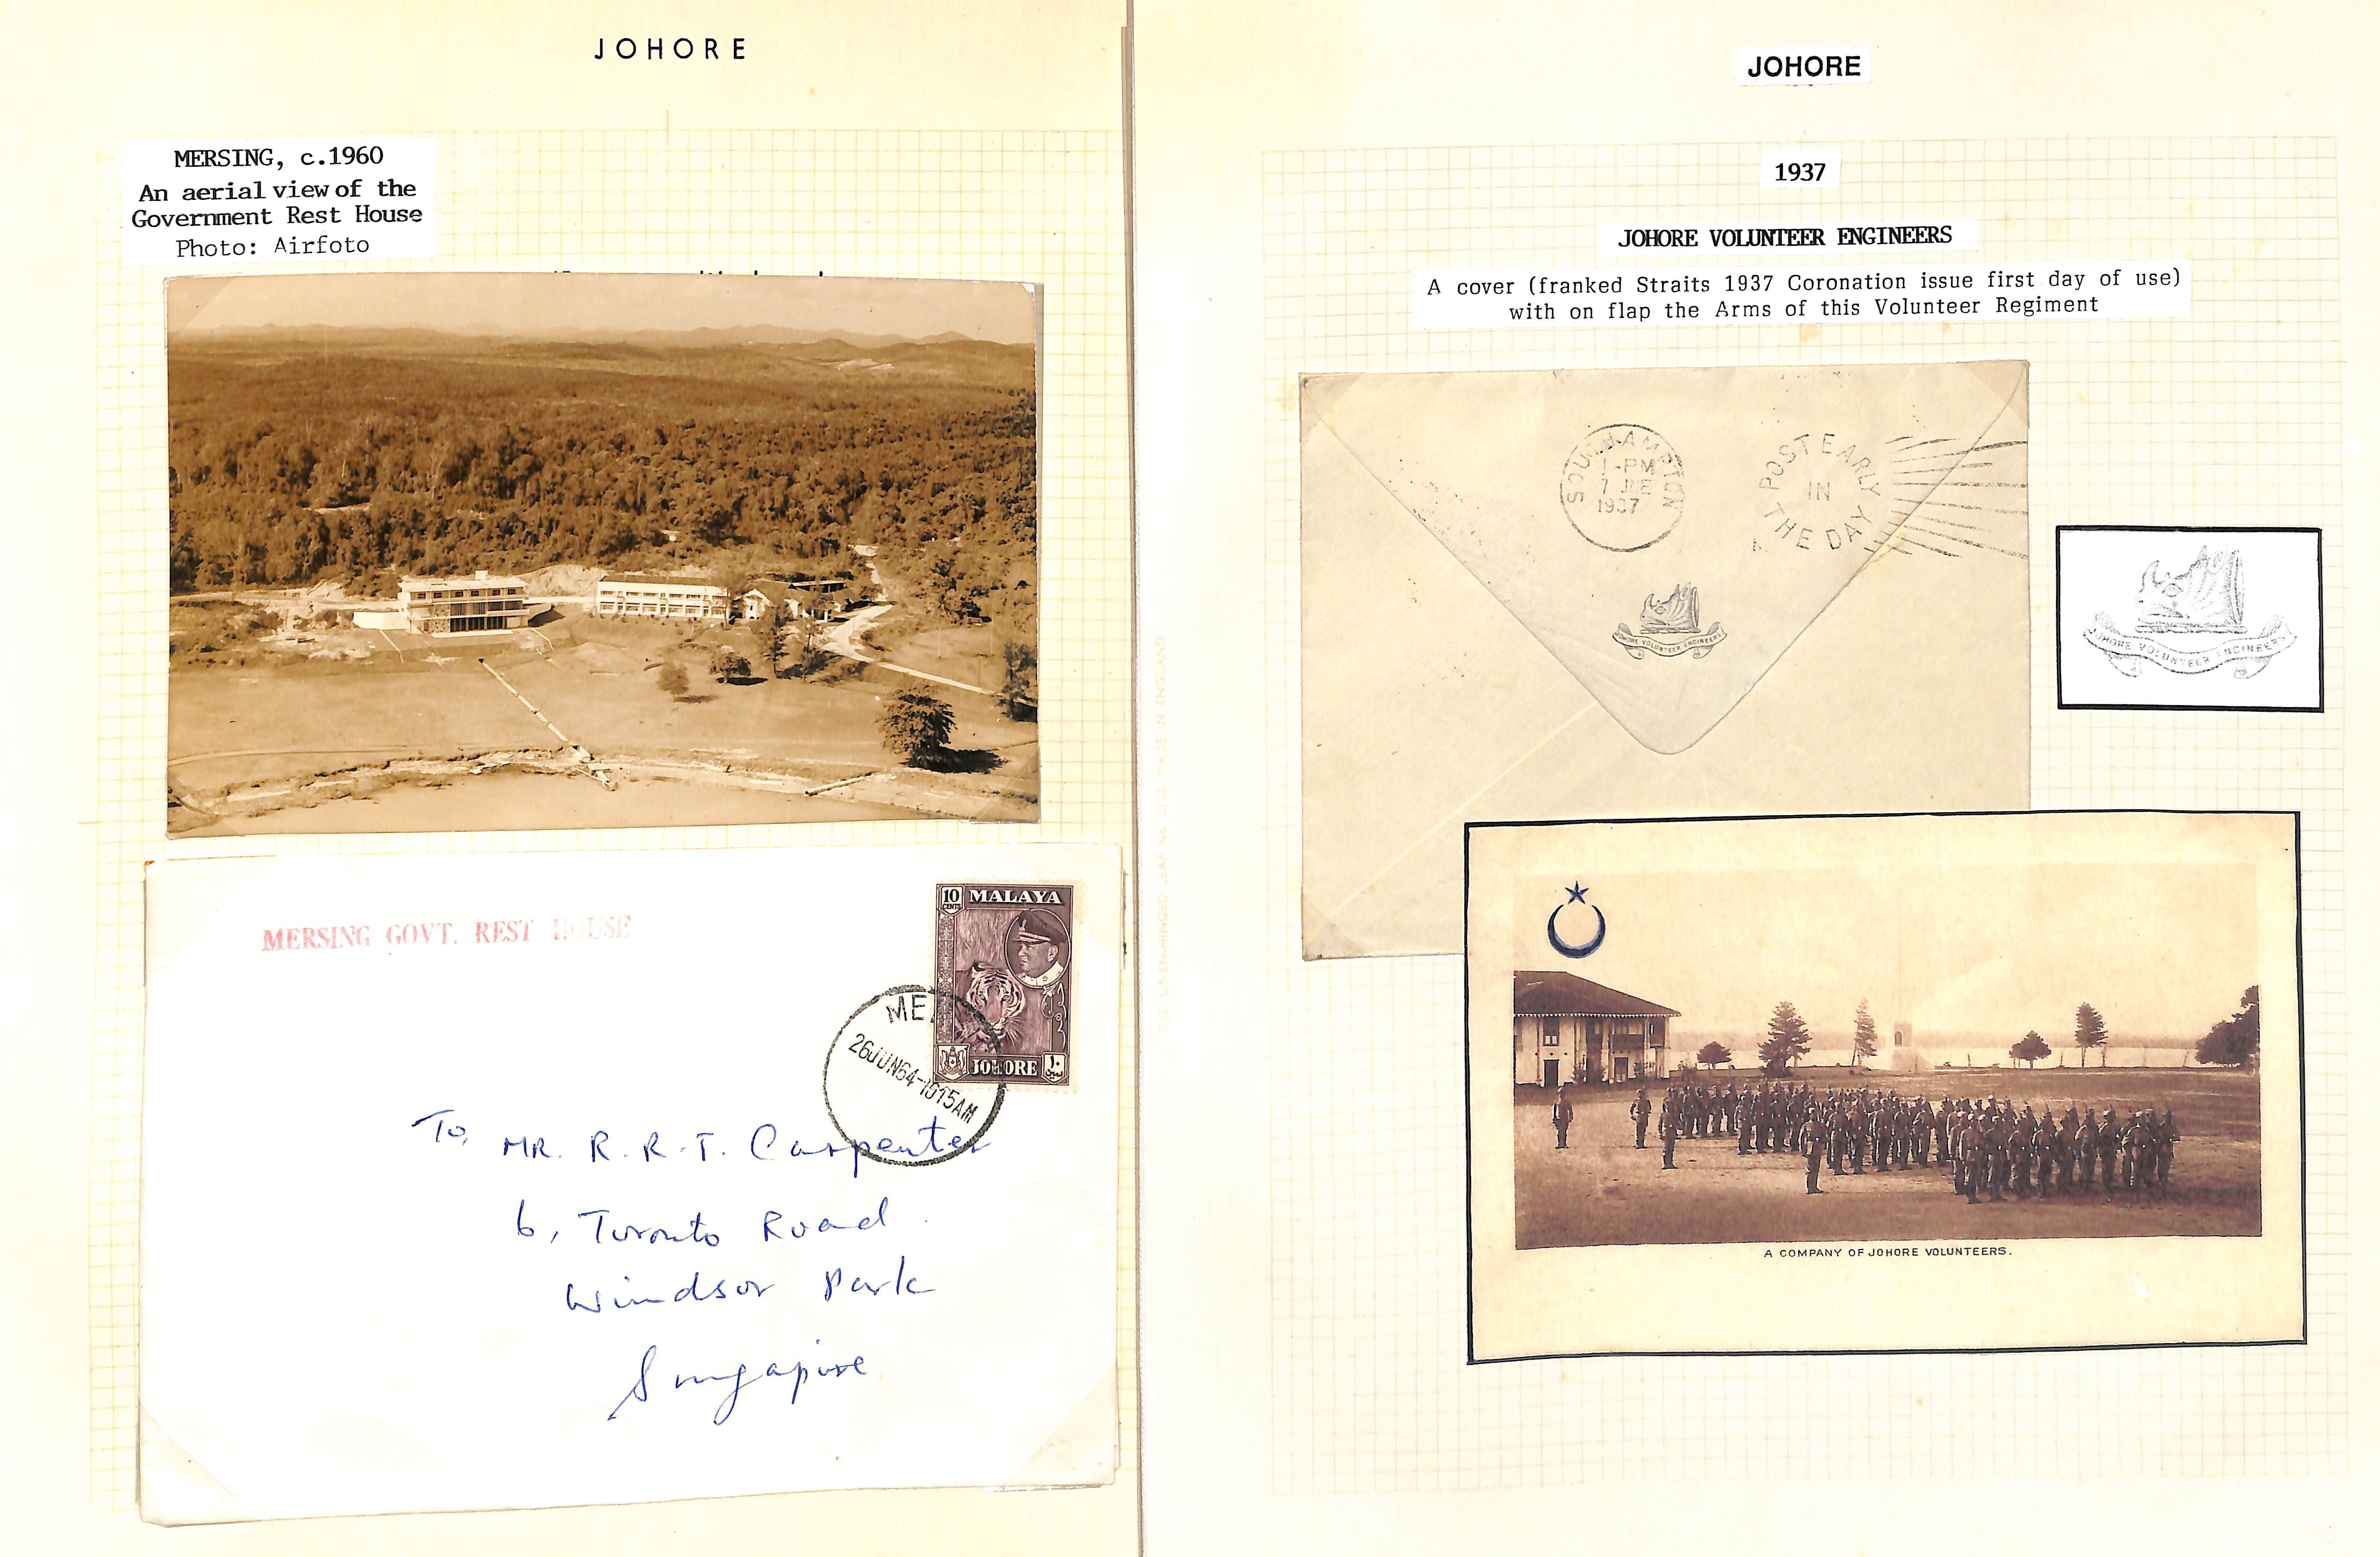 Johore. 1908-64 Covers, cards and ephemera including 1913 Red Band envelope from Kota Tinggi to - Image 3 of 7